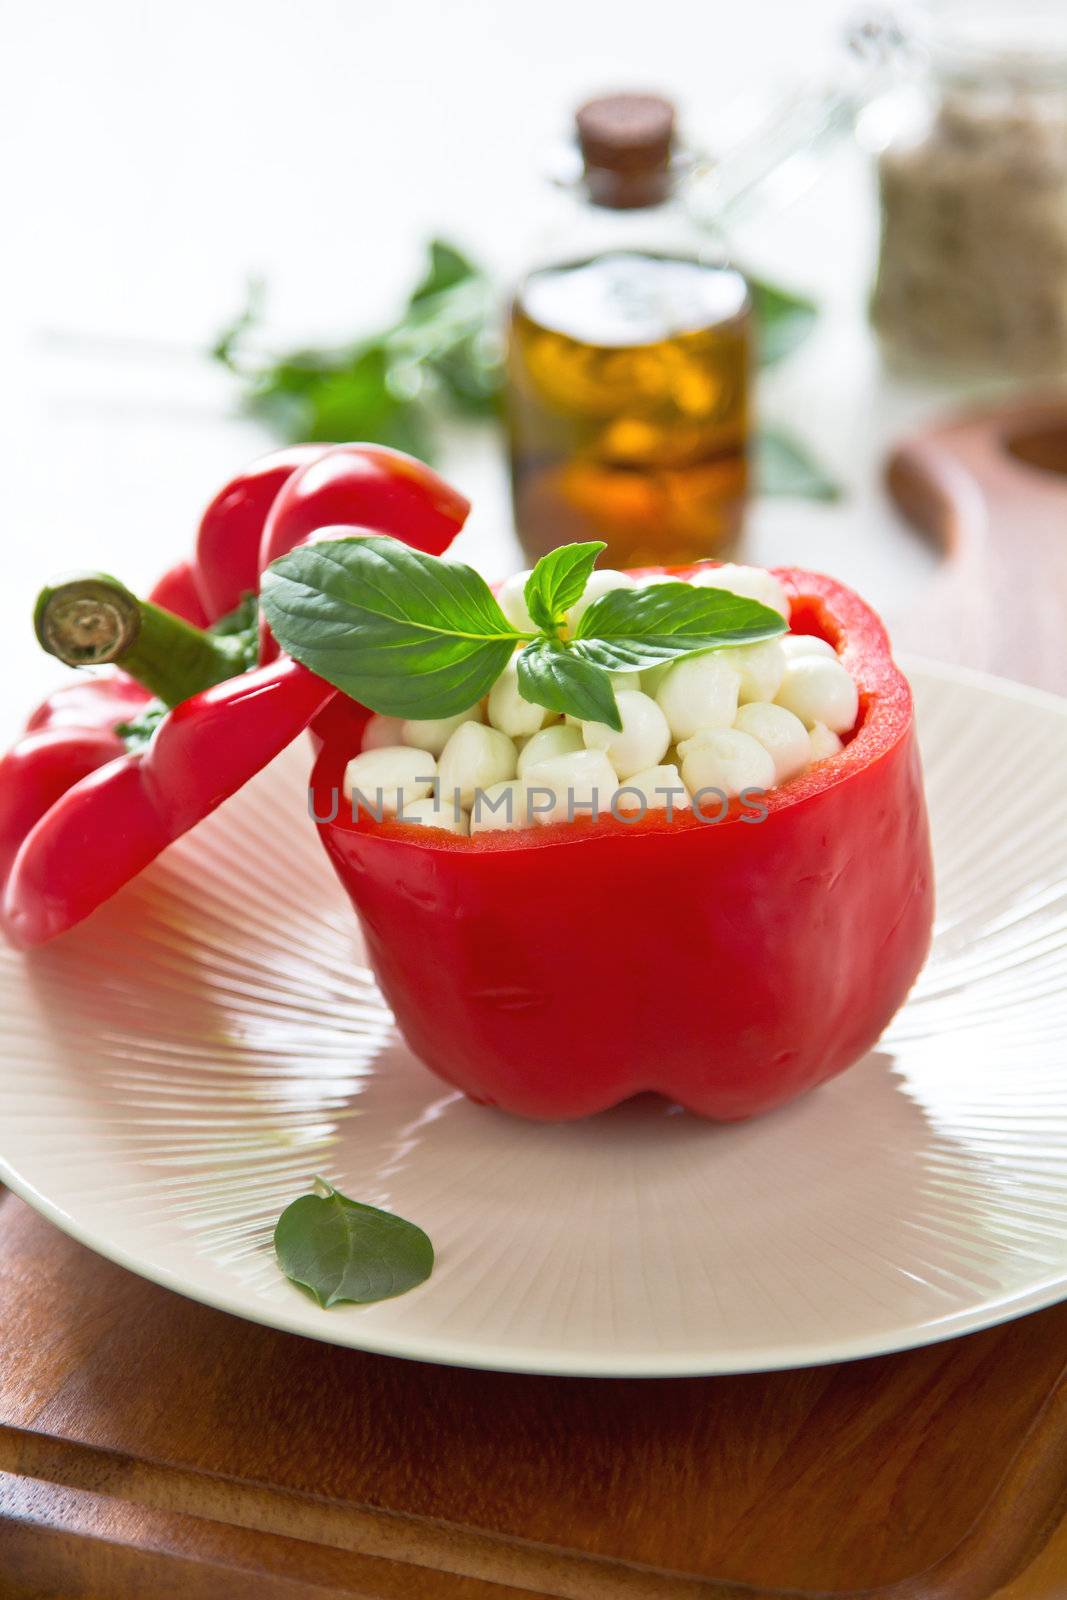 Pearl Mozzarella in Red pepper by vanillaechoes